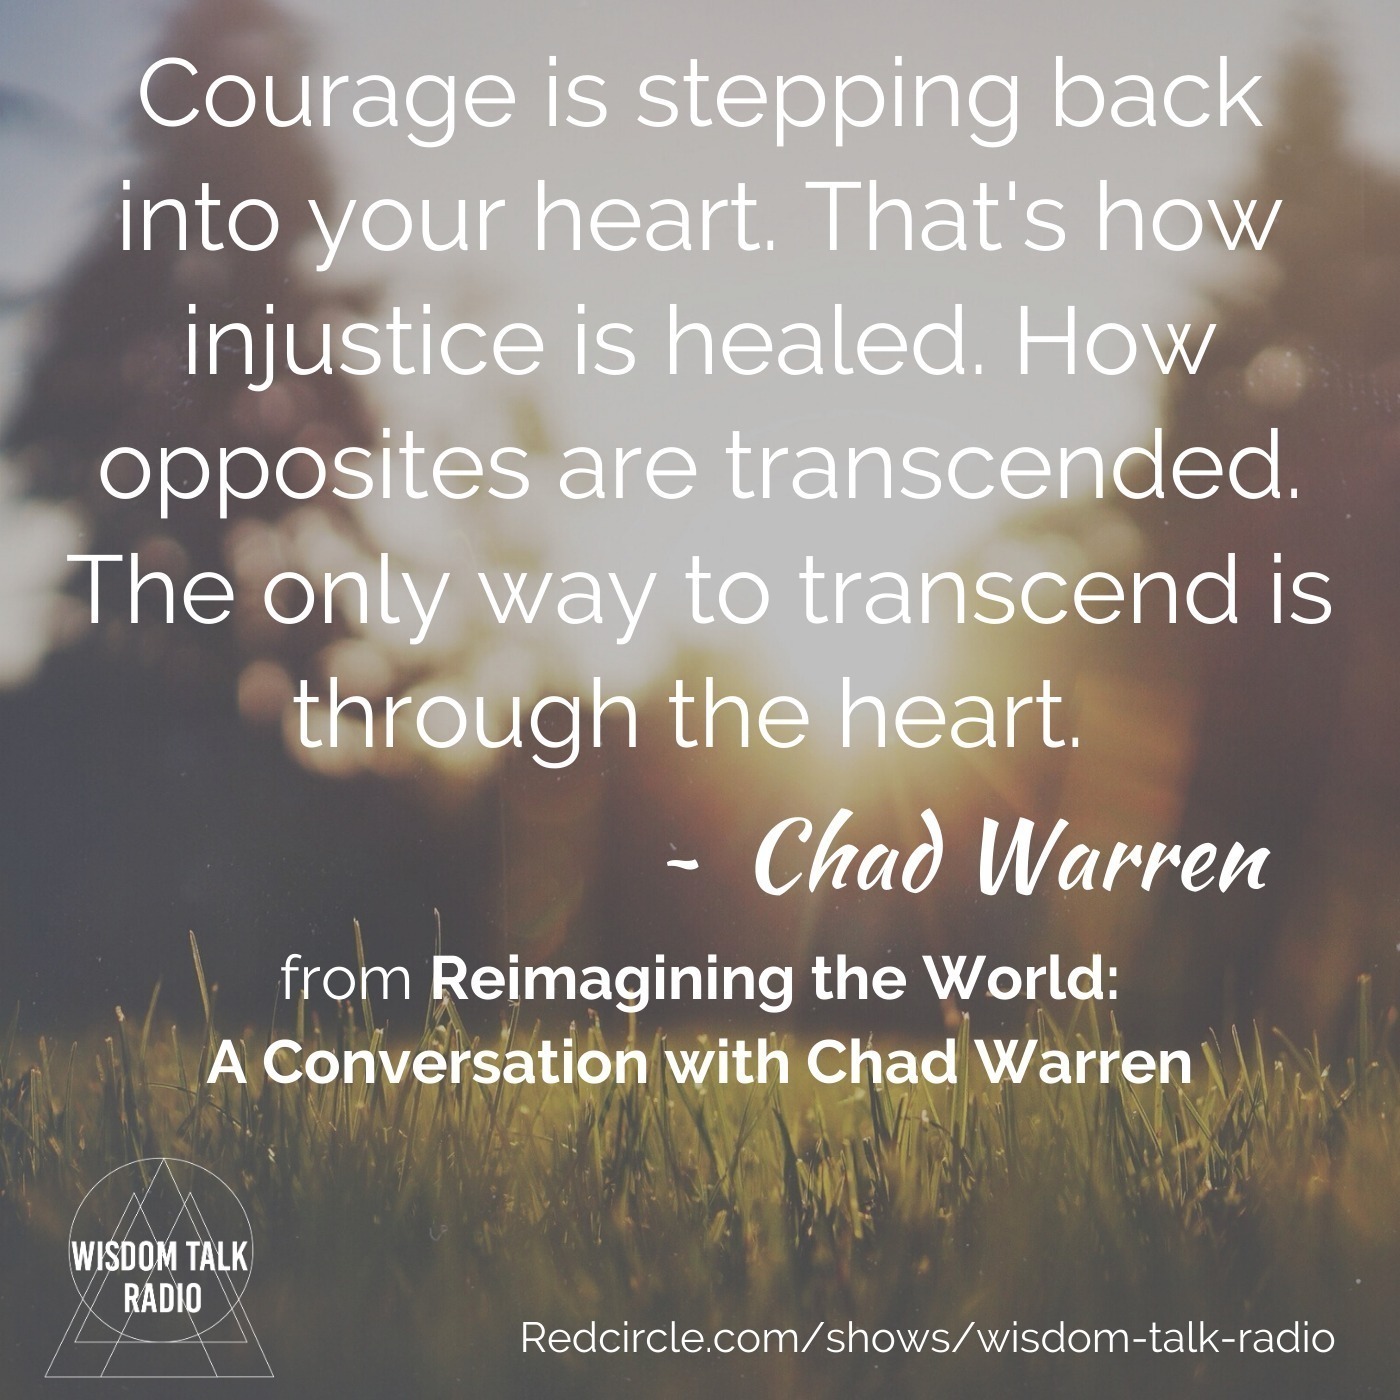 Re-imagining the World: a conversation with Chad Warren